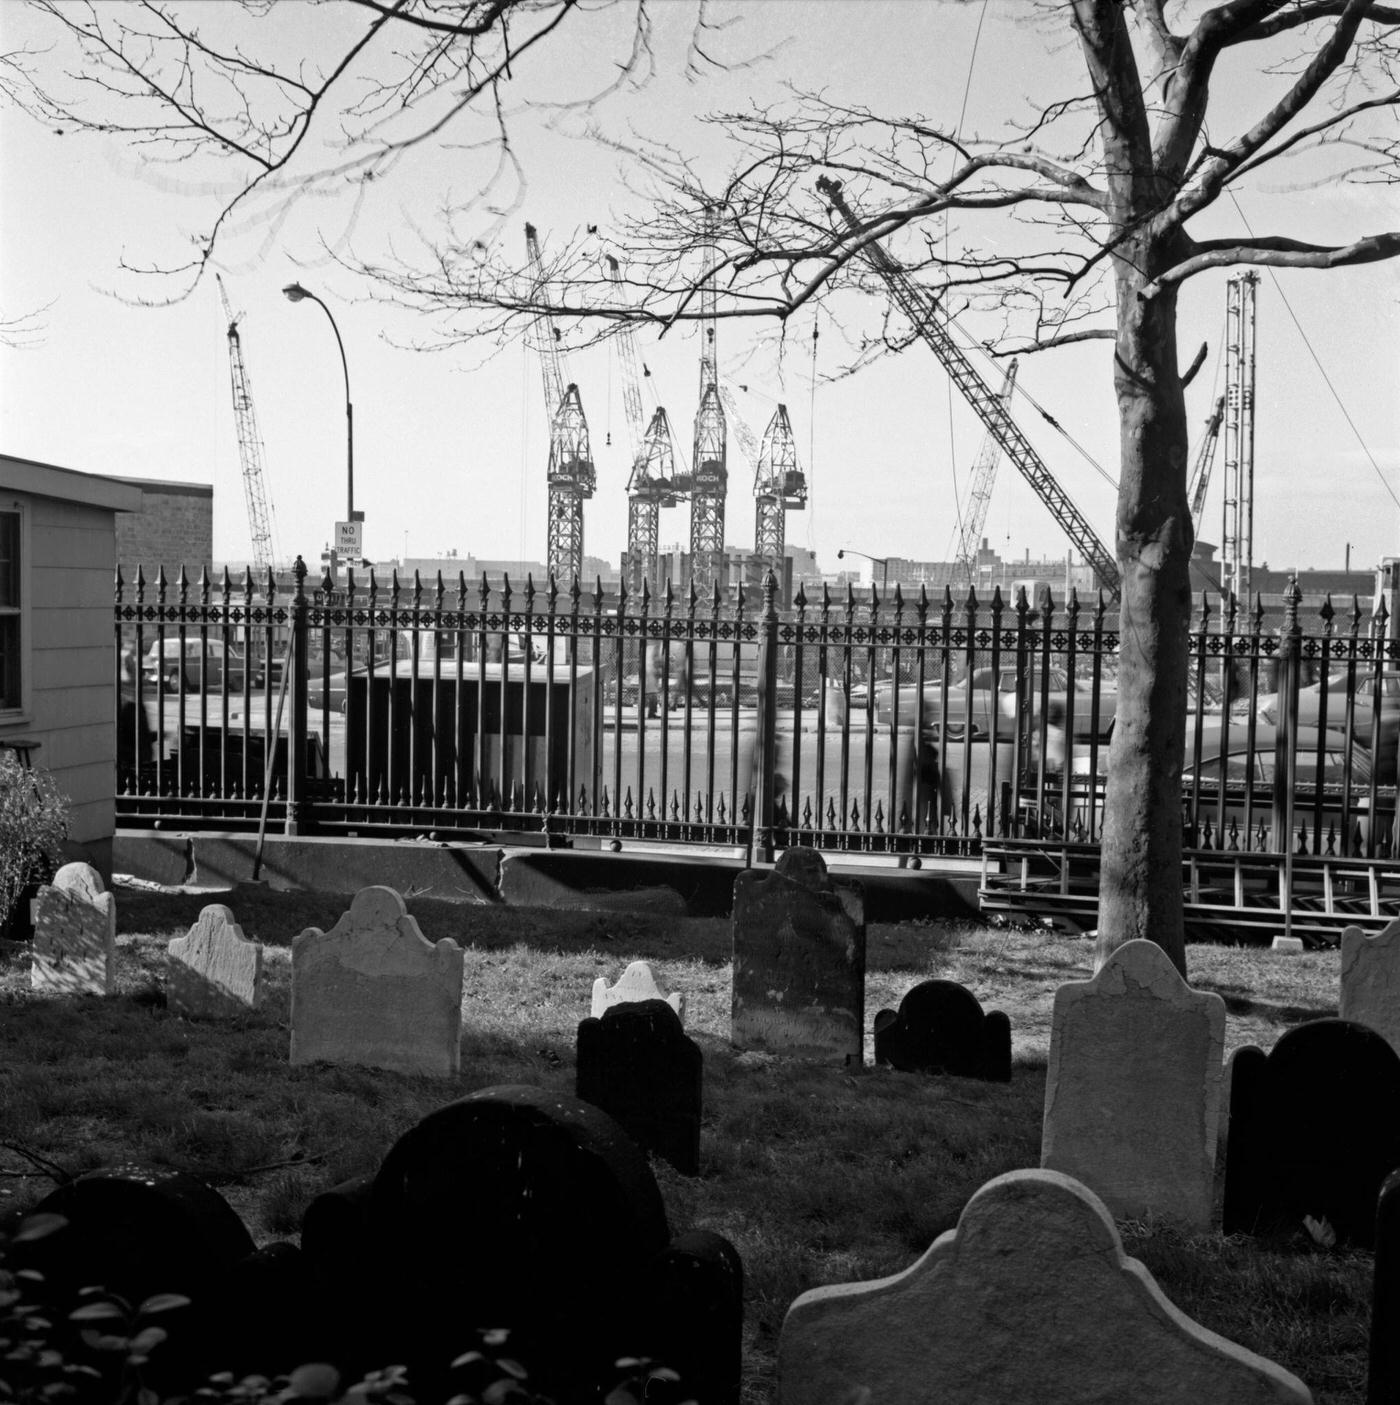 Construction Of Wtc Towers One &Amp;Amp; Two Near St. Paul'S Chapel, Gravestones Lining Church Street With Cranes In The Background, Manhattan, 1968